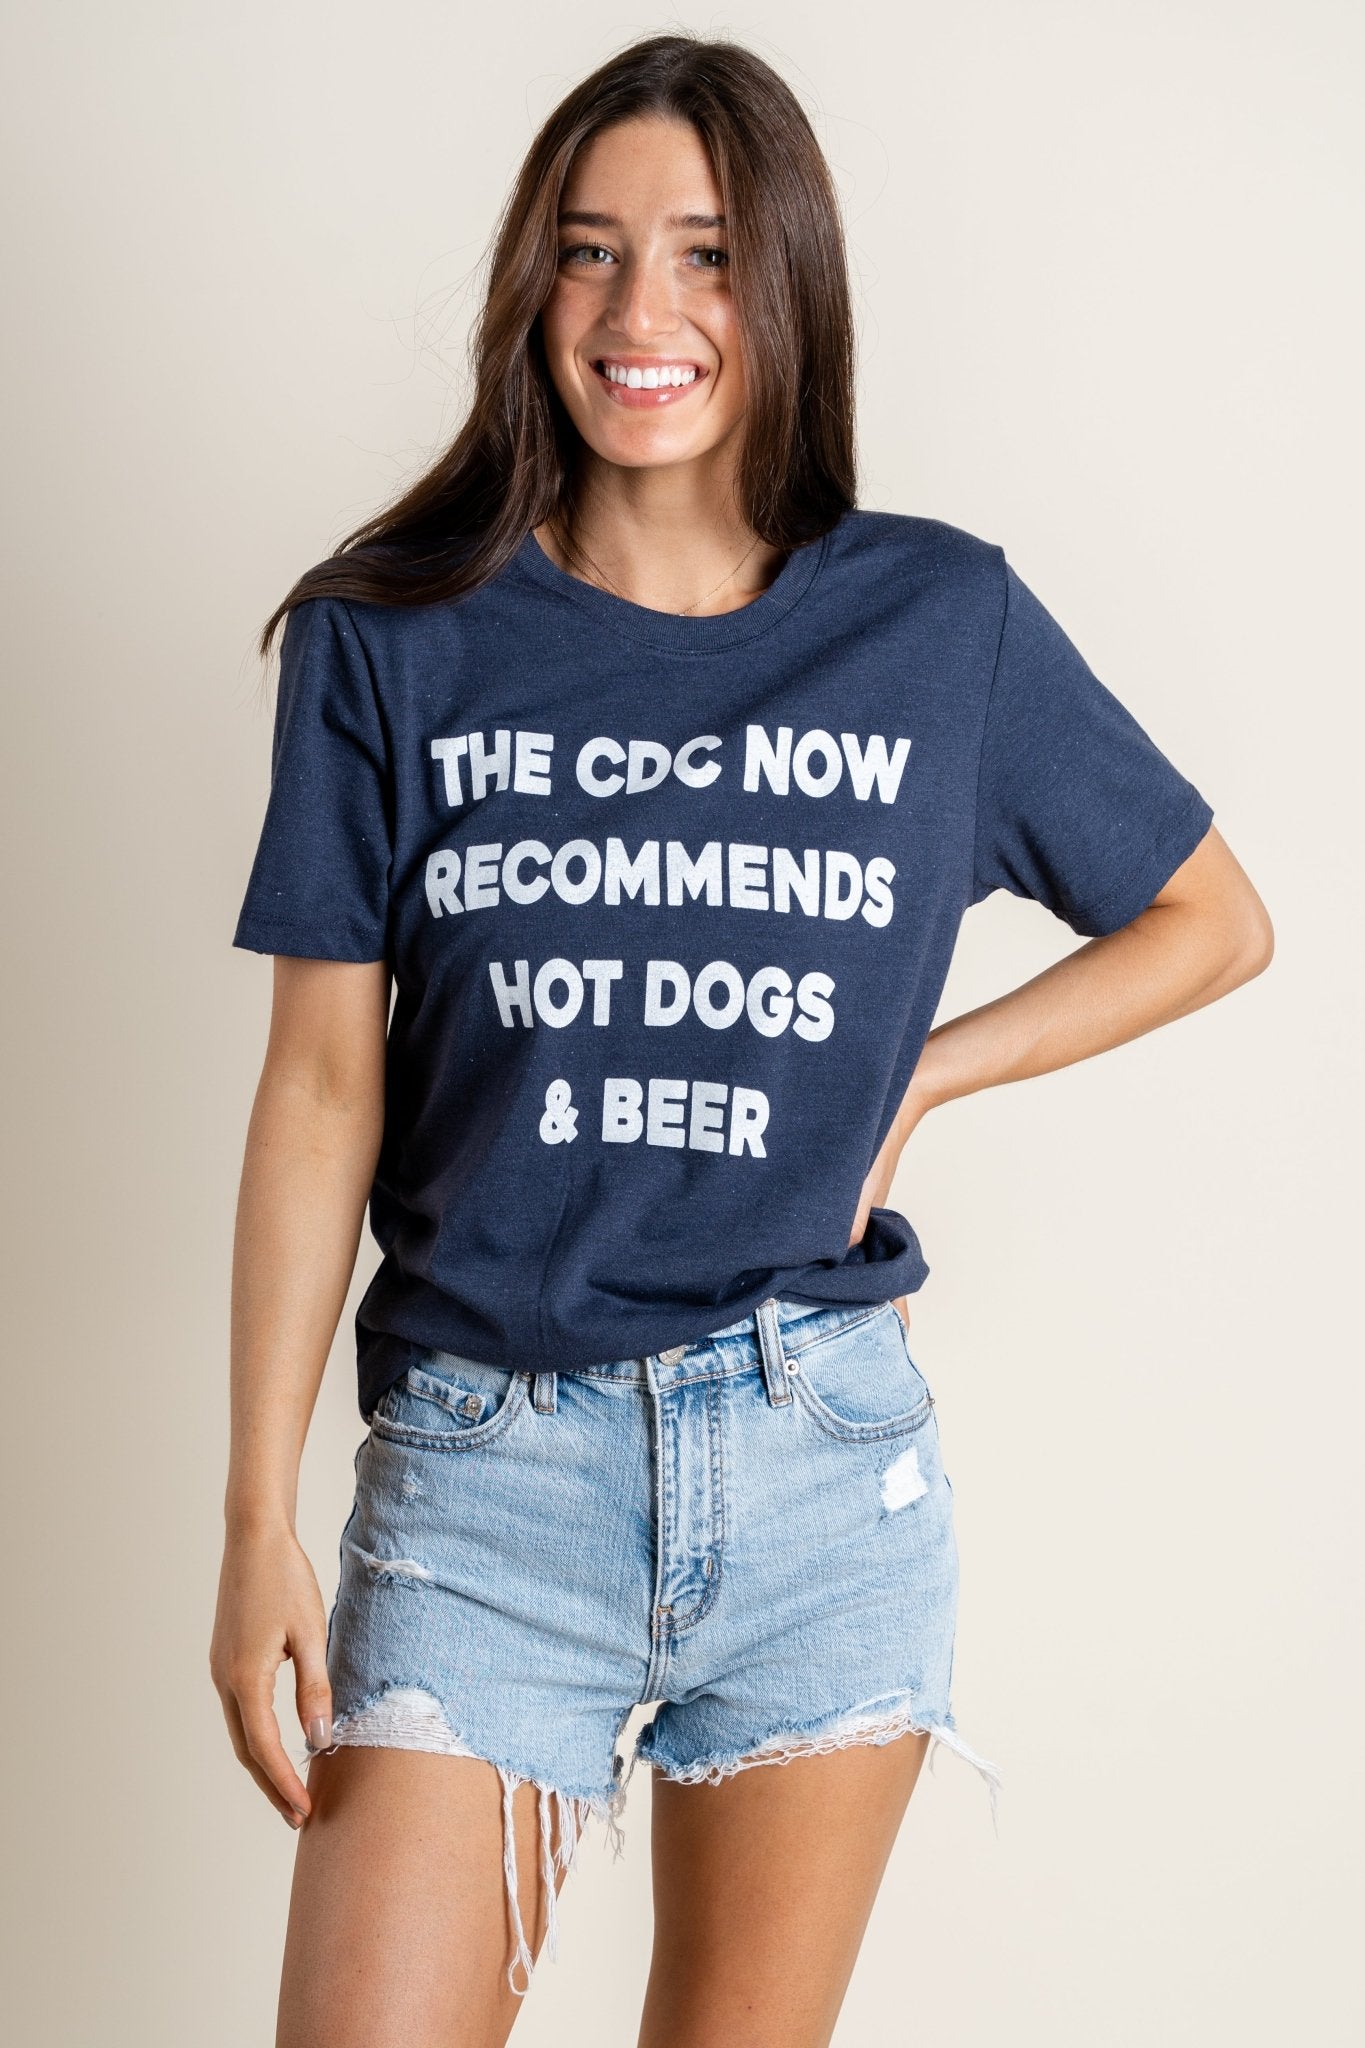 CDC hotdogs unisex short sleeve t-shirt navy - Cute T-shirts - Trendy Graphic T-Shirts at Lush Fashion Lounge Boutique in Oklahoma City